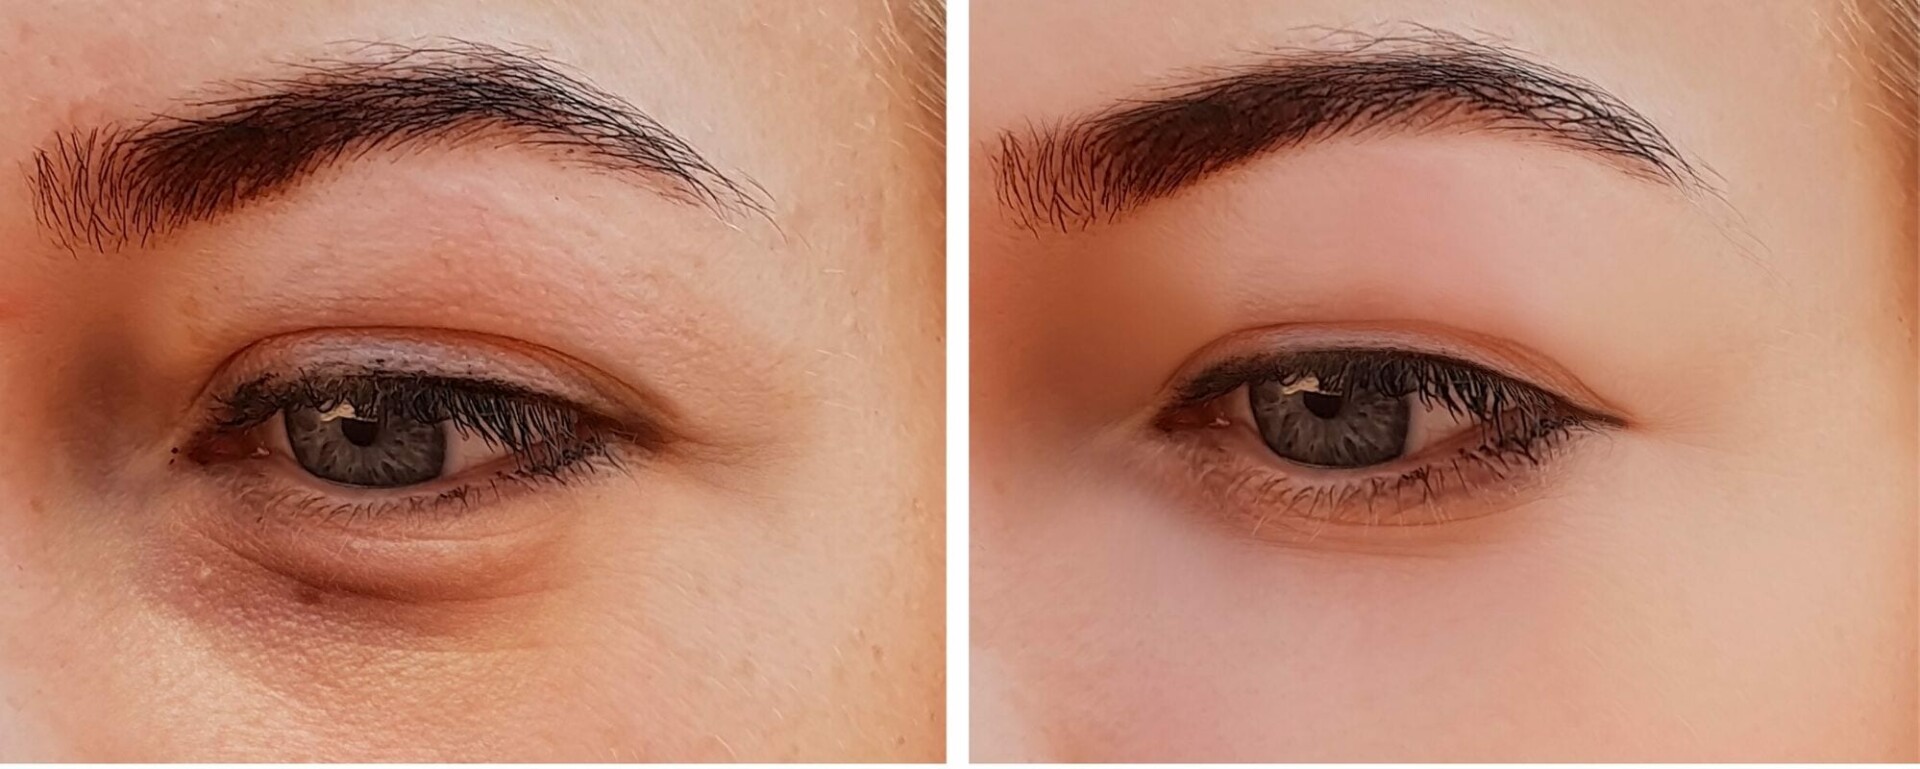 eye bags before and after